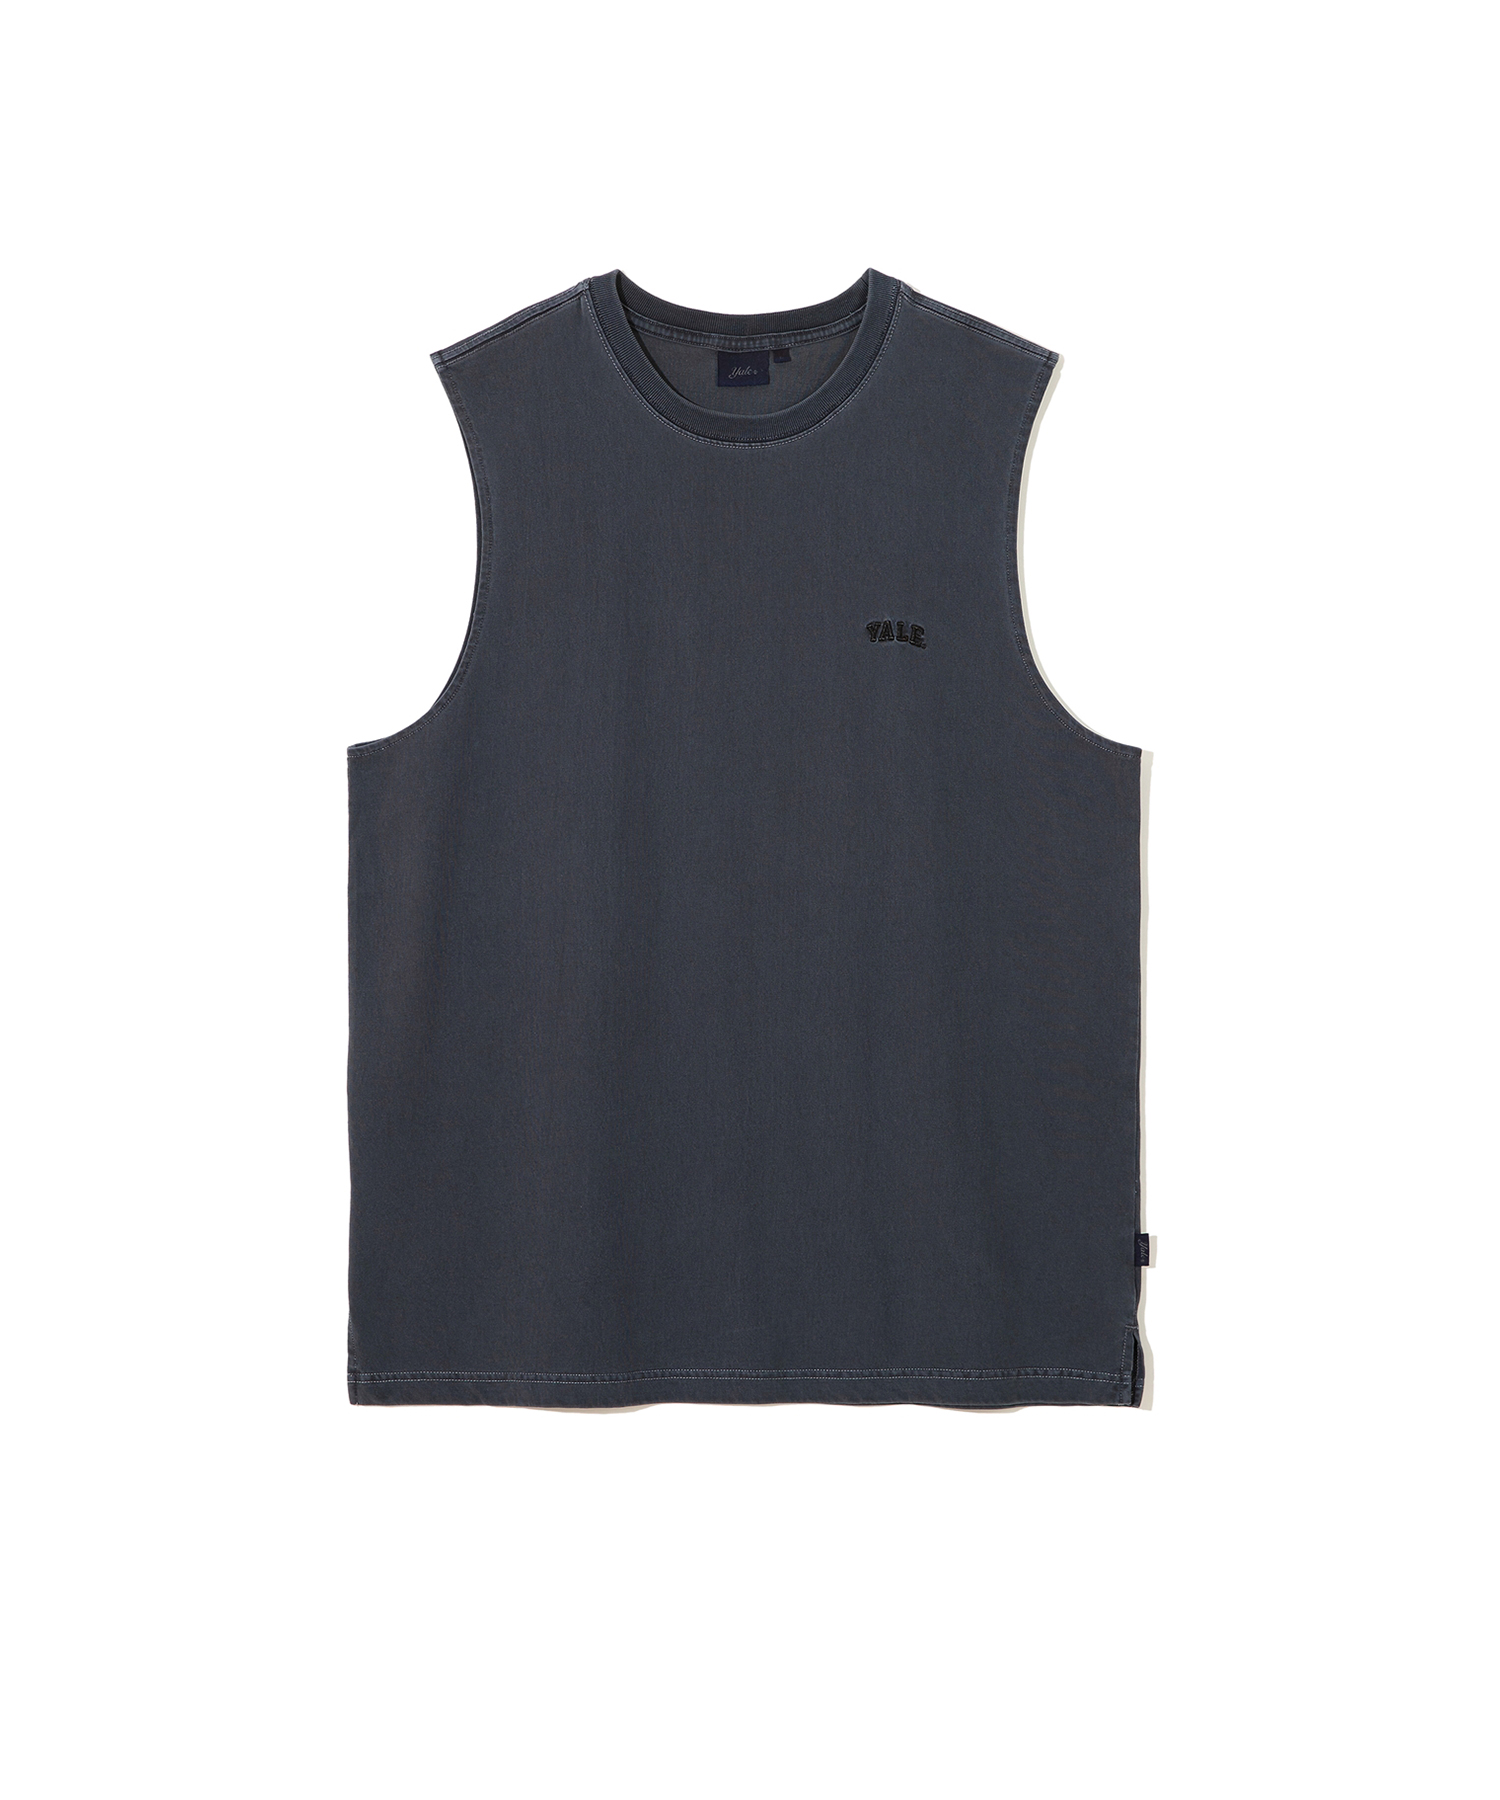 [ONEMILE WEAR] SMALL ARCH LOGO SLEEVELESS PG CHARCOAL